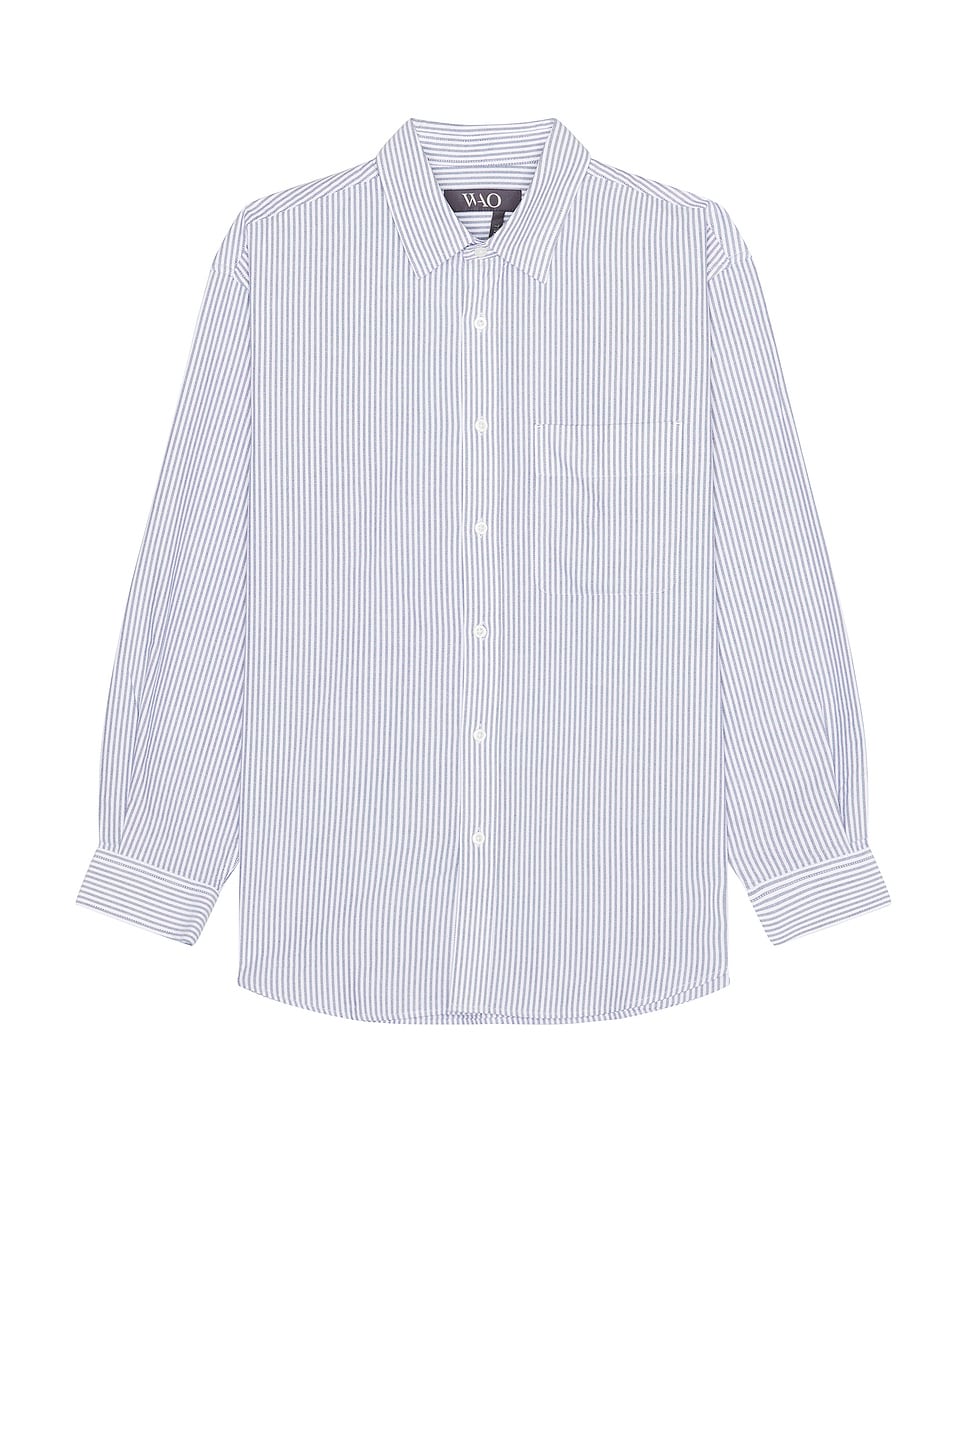 Image 1 of WAO Relaxed Oxford Shirt in Navy Stripe